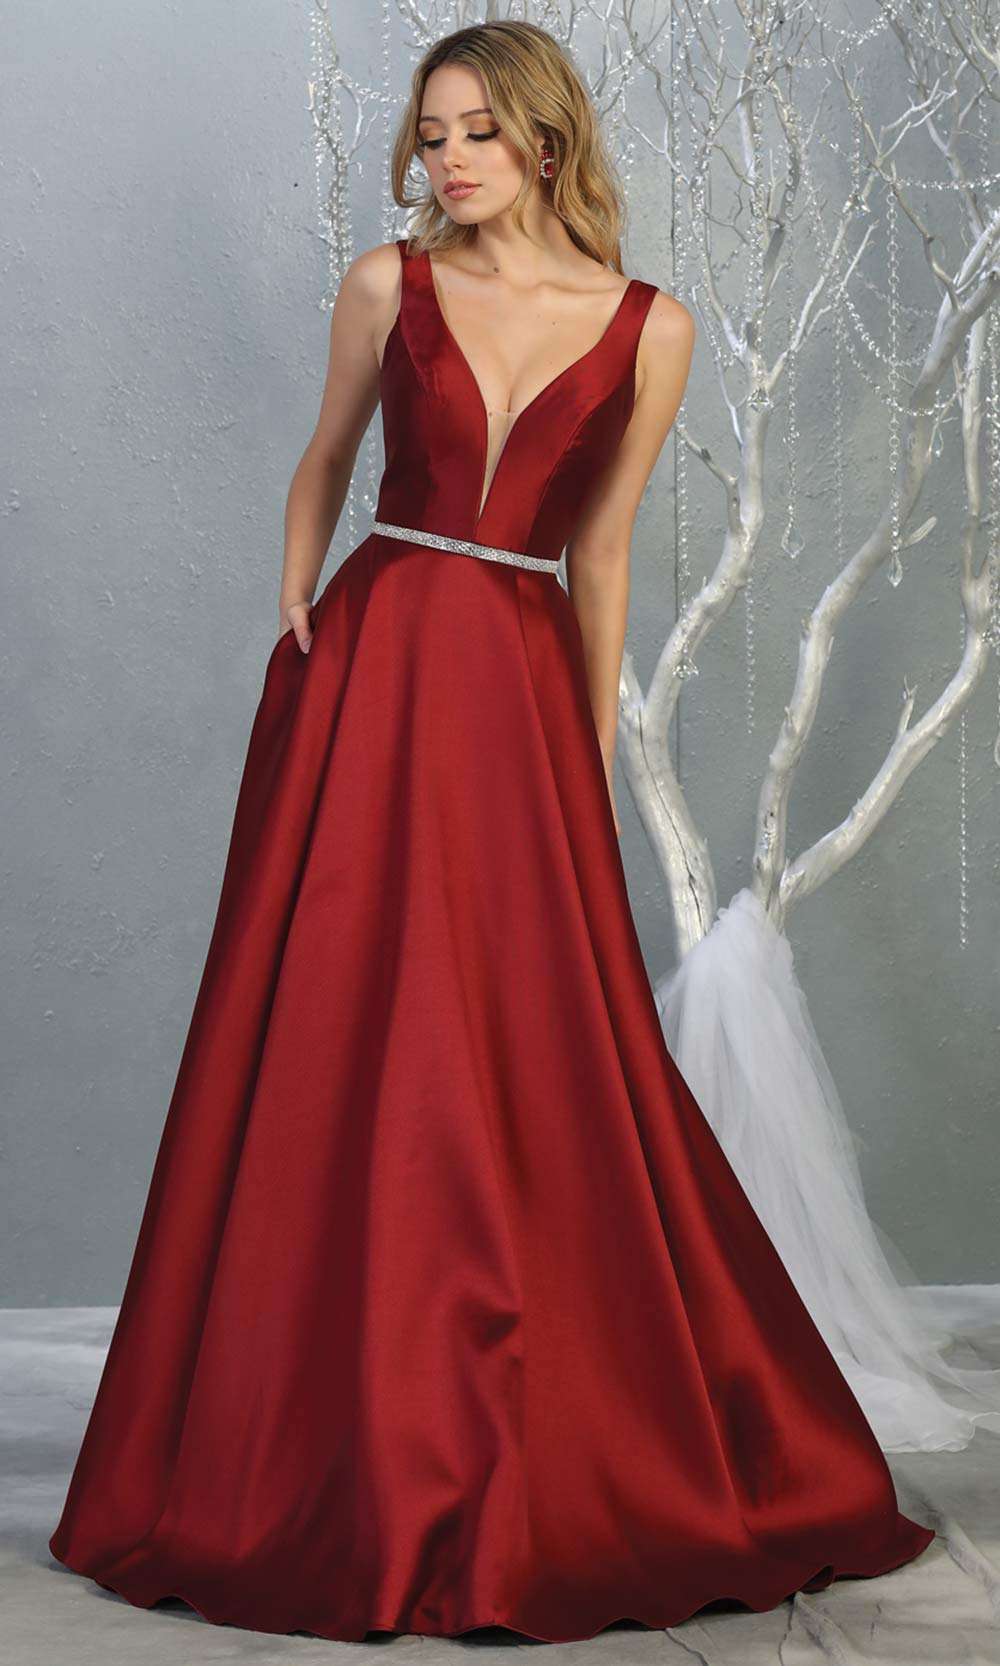 Mayqueen MQ1678 Long simple v neck burgundy red semi ballgown with pockets. This dark red flowy gown from mayqueen is perfect for prom, black tie event, engagement dress, formal party dress, plus size wedding guest dresses, bridesmaid, indowestern party dress